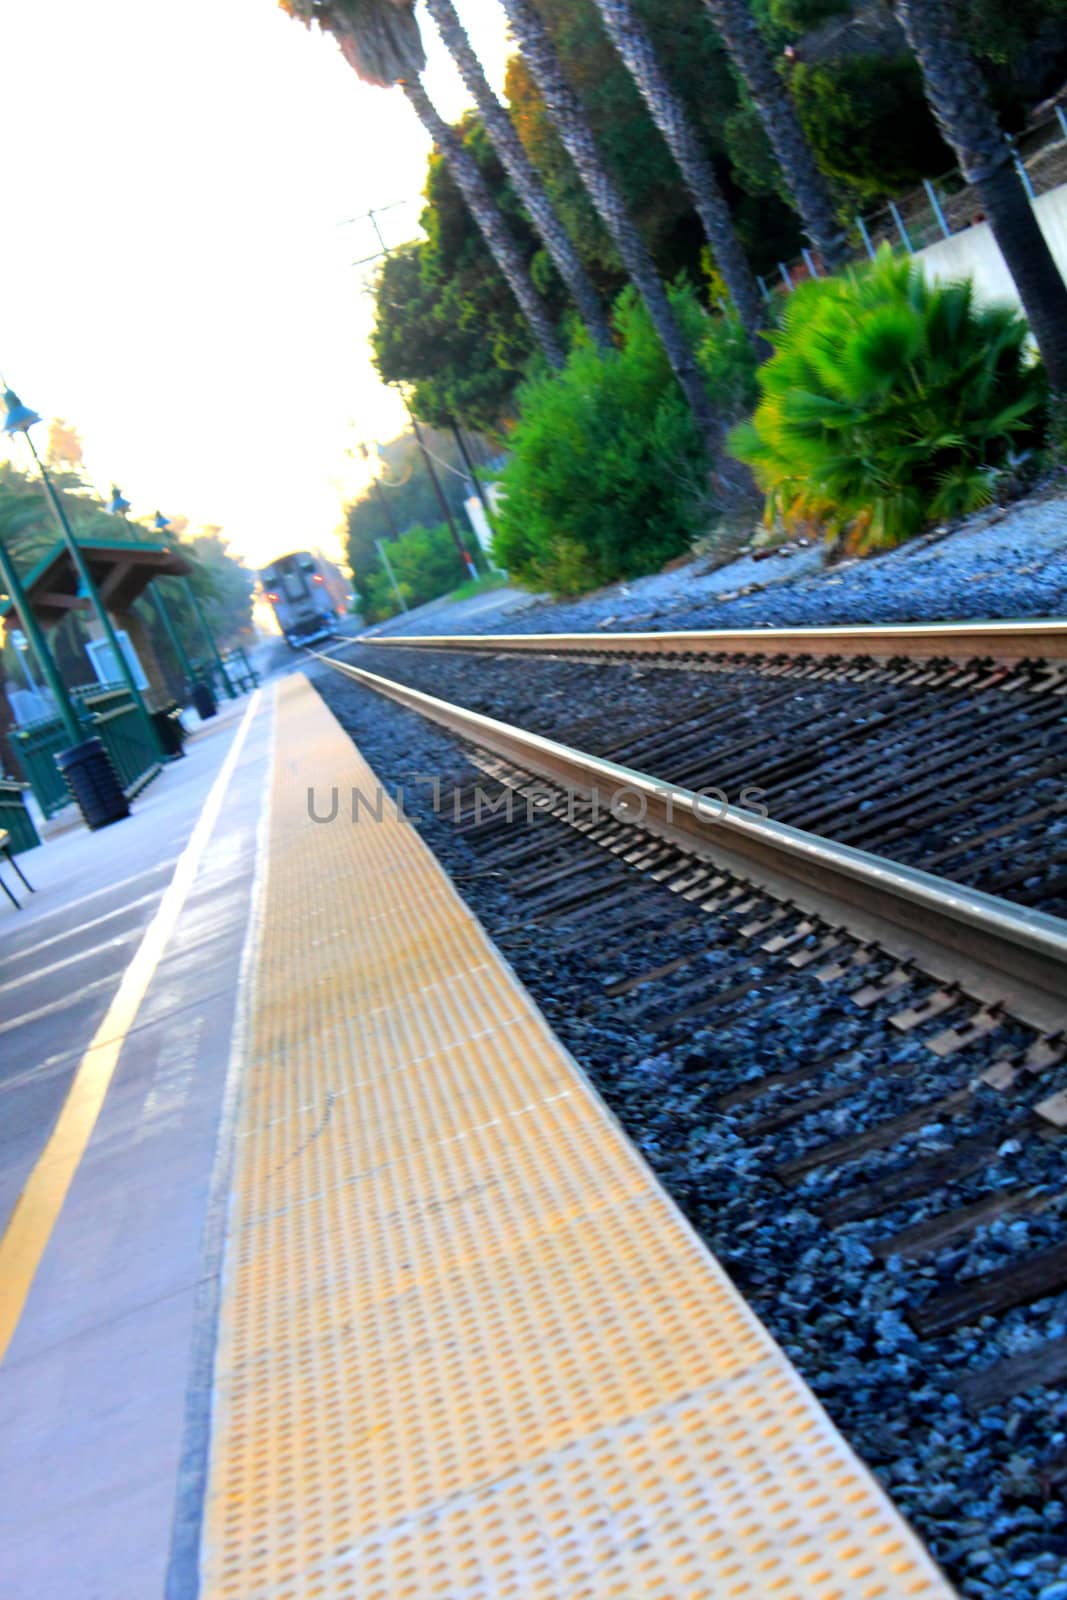 Train Station in Ventura California with a view of the tracks